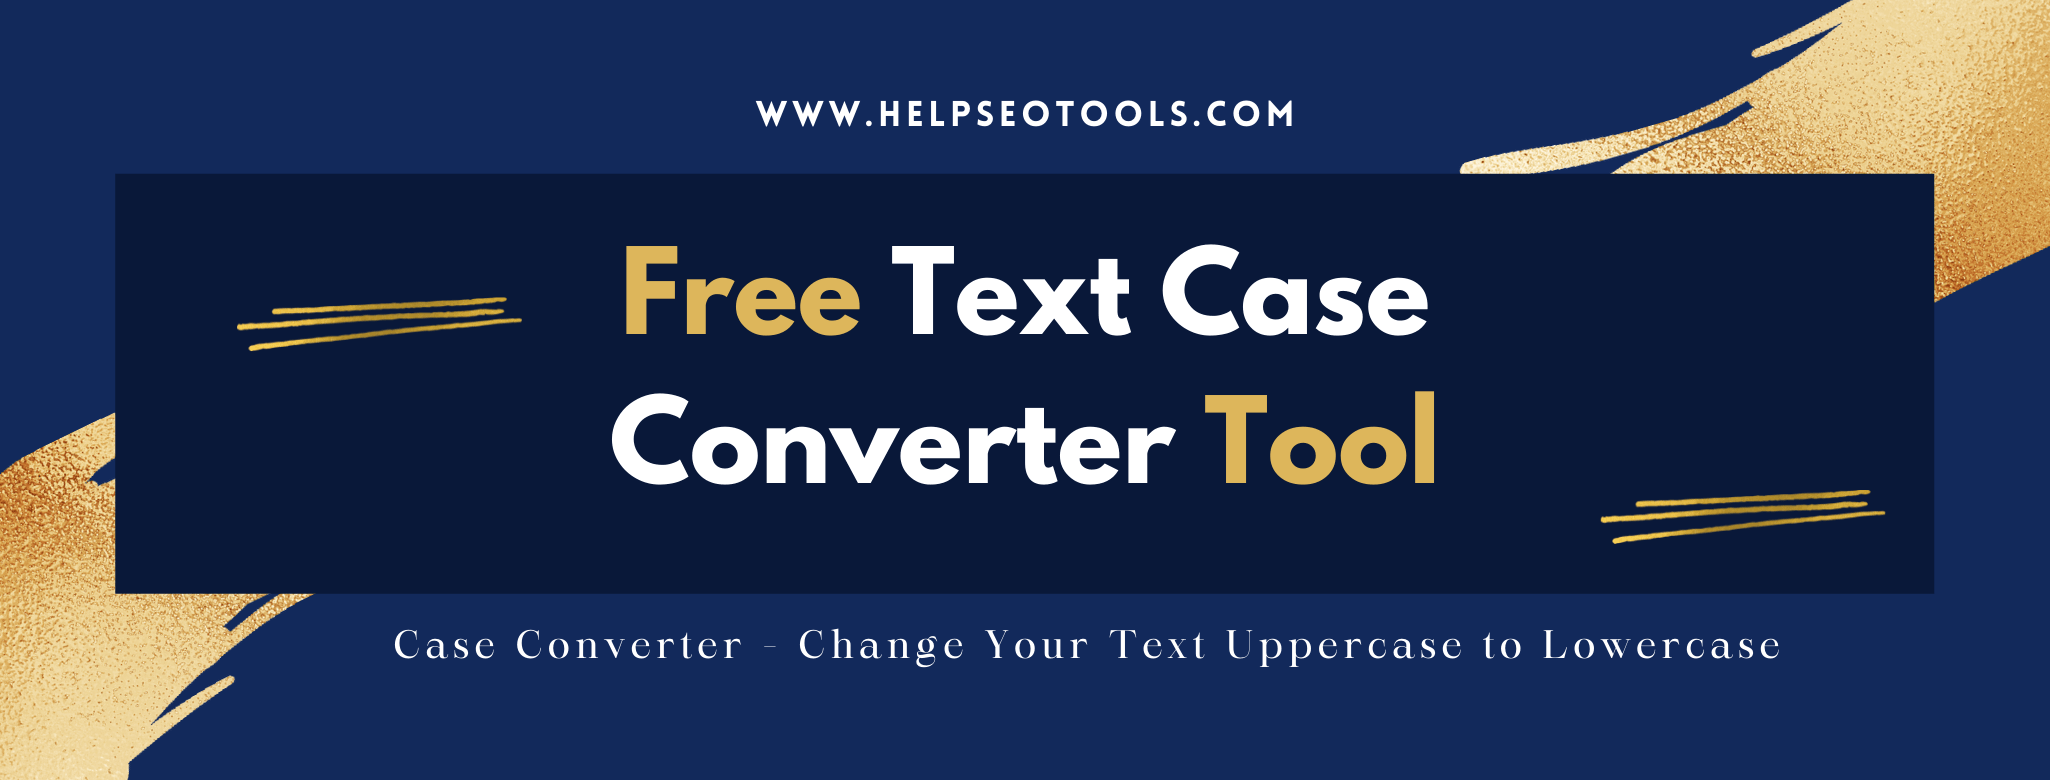 Free Online Text Case Converter tools